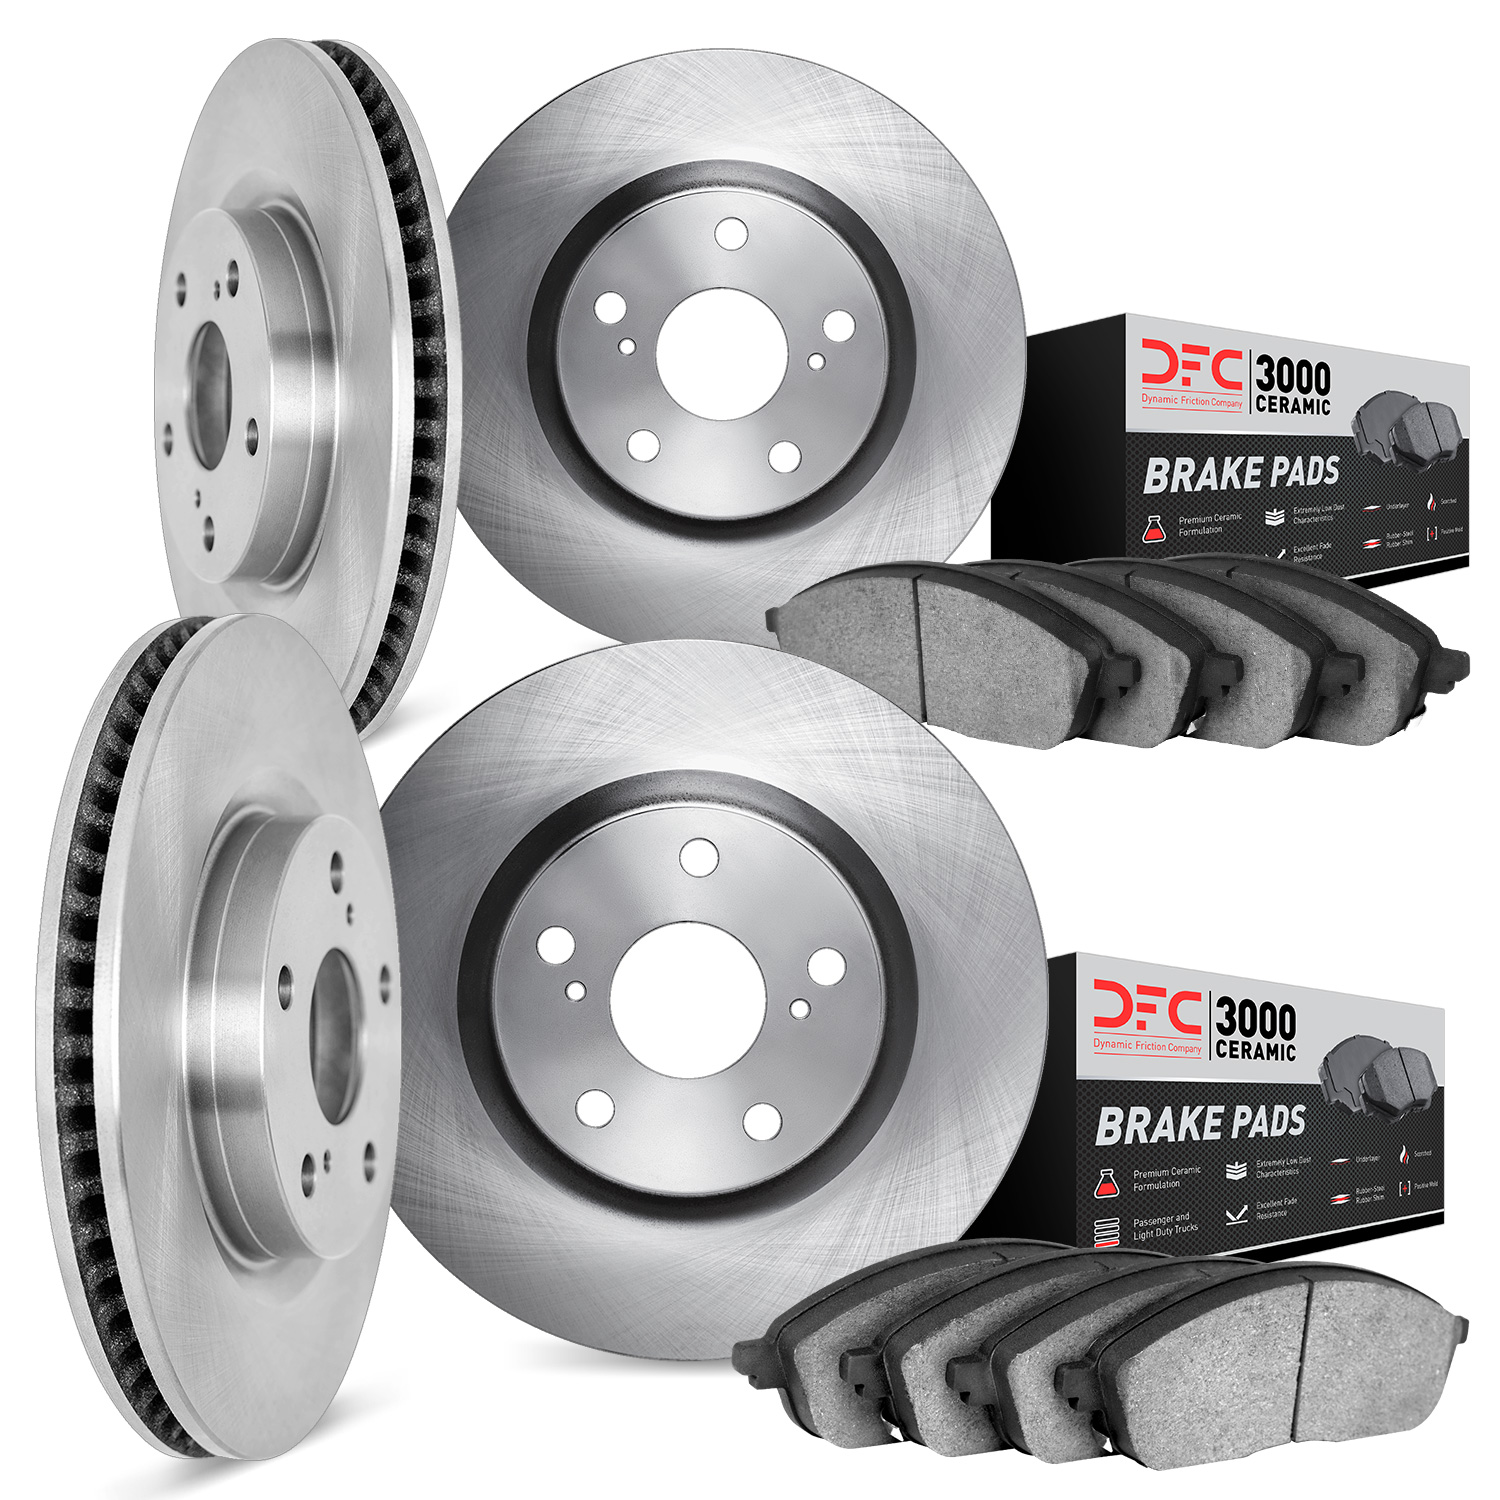 6304-75002 Brake Rotors with 3000-Series Ceramic Brake Pads Kit, 1991-1992 Lexus/Toyota/Scion, Position: Front and Rear